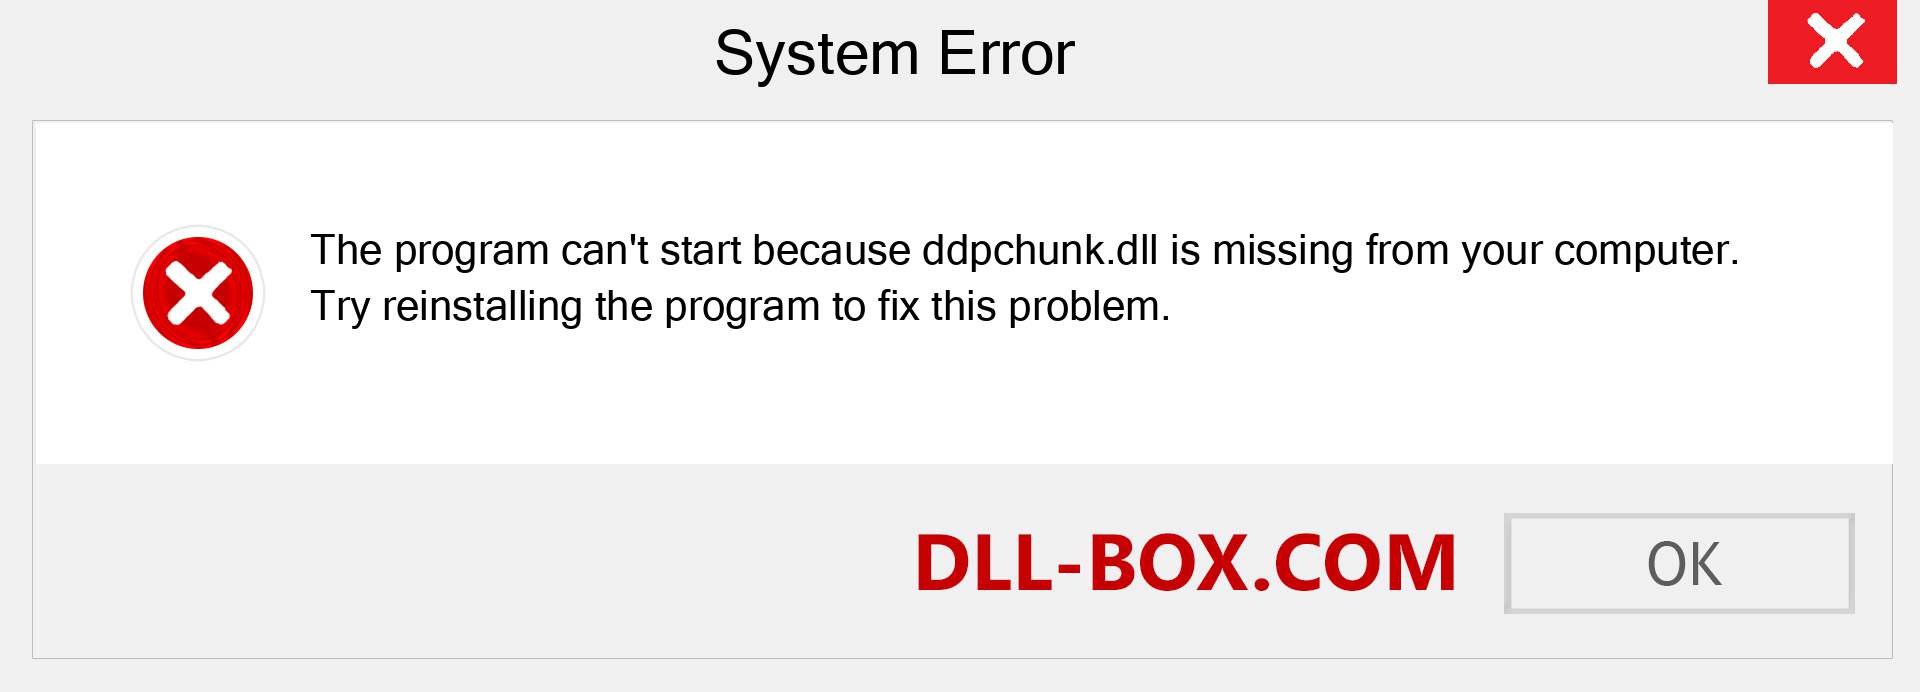  ddpchunk.dll file is missing?. Download for Windows 7, 8, 10 - Fix  ddpchunk dll Missing Error on Windows, photos, images